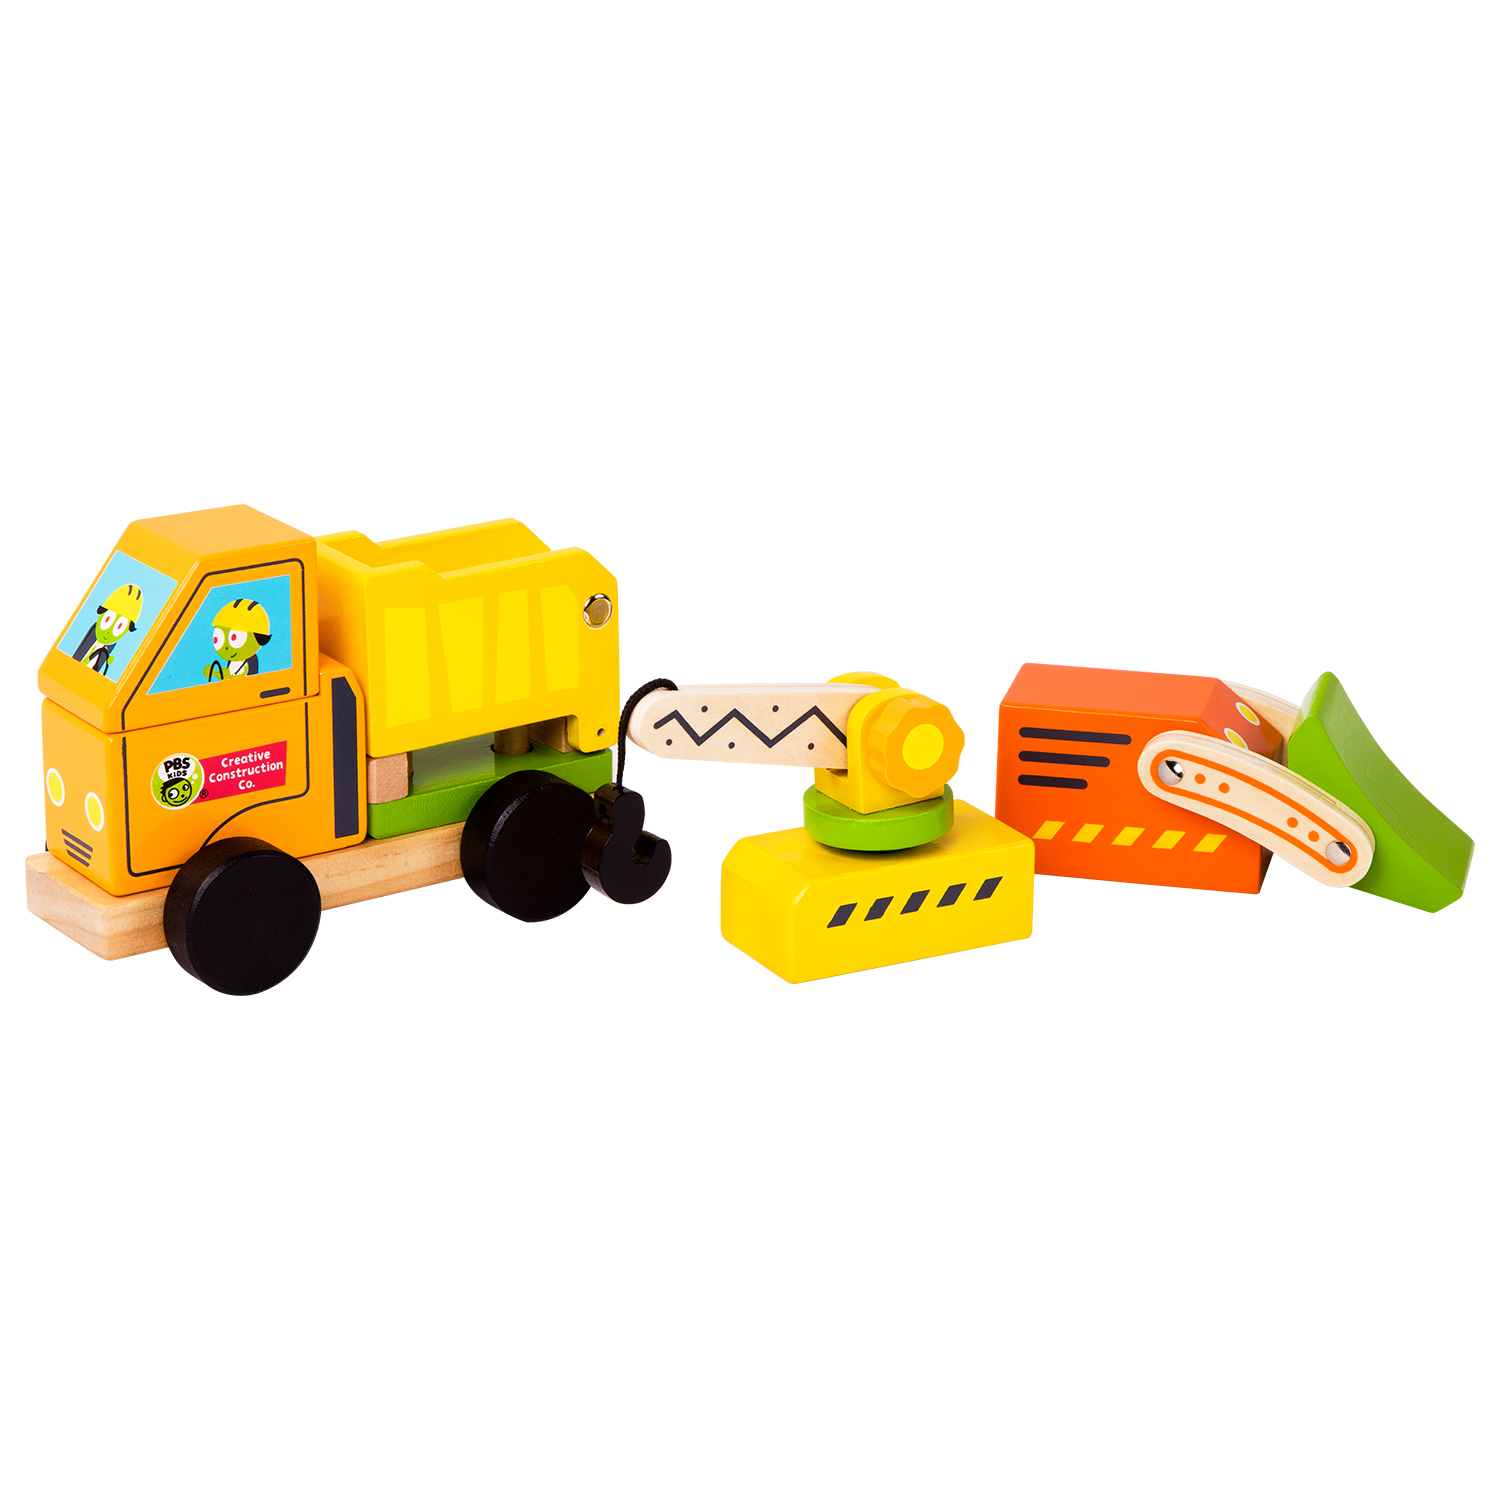 PBS KIDS Creative Construction 3-in-1 Construction Vehicle